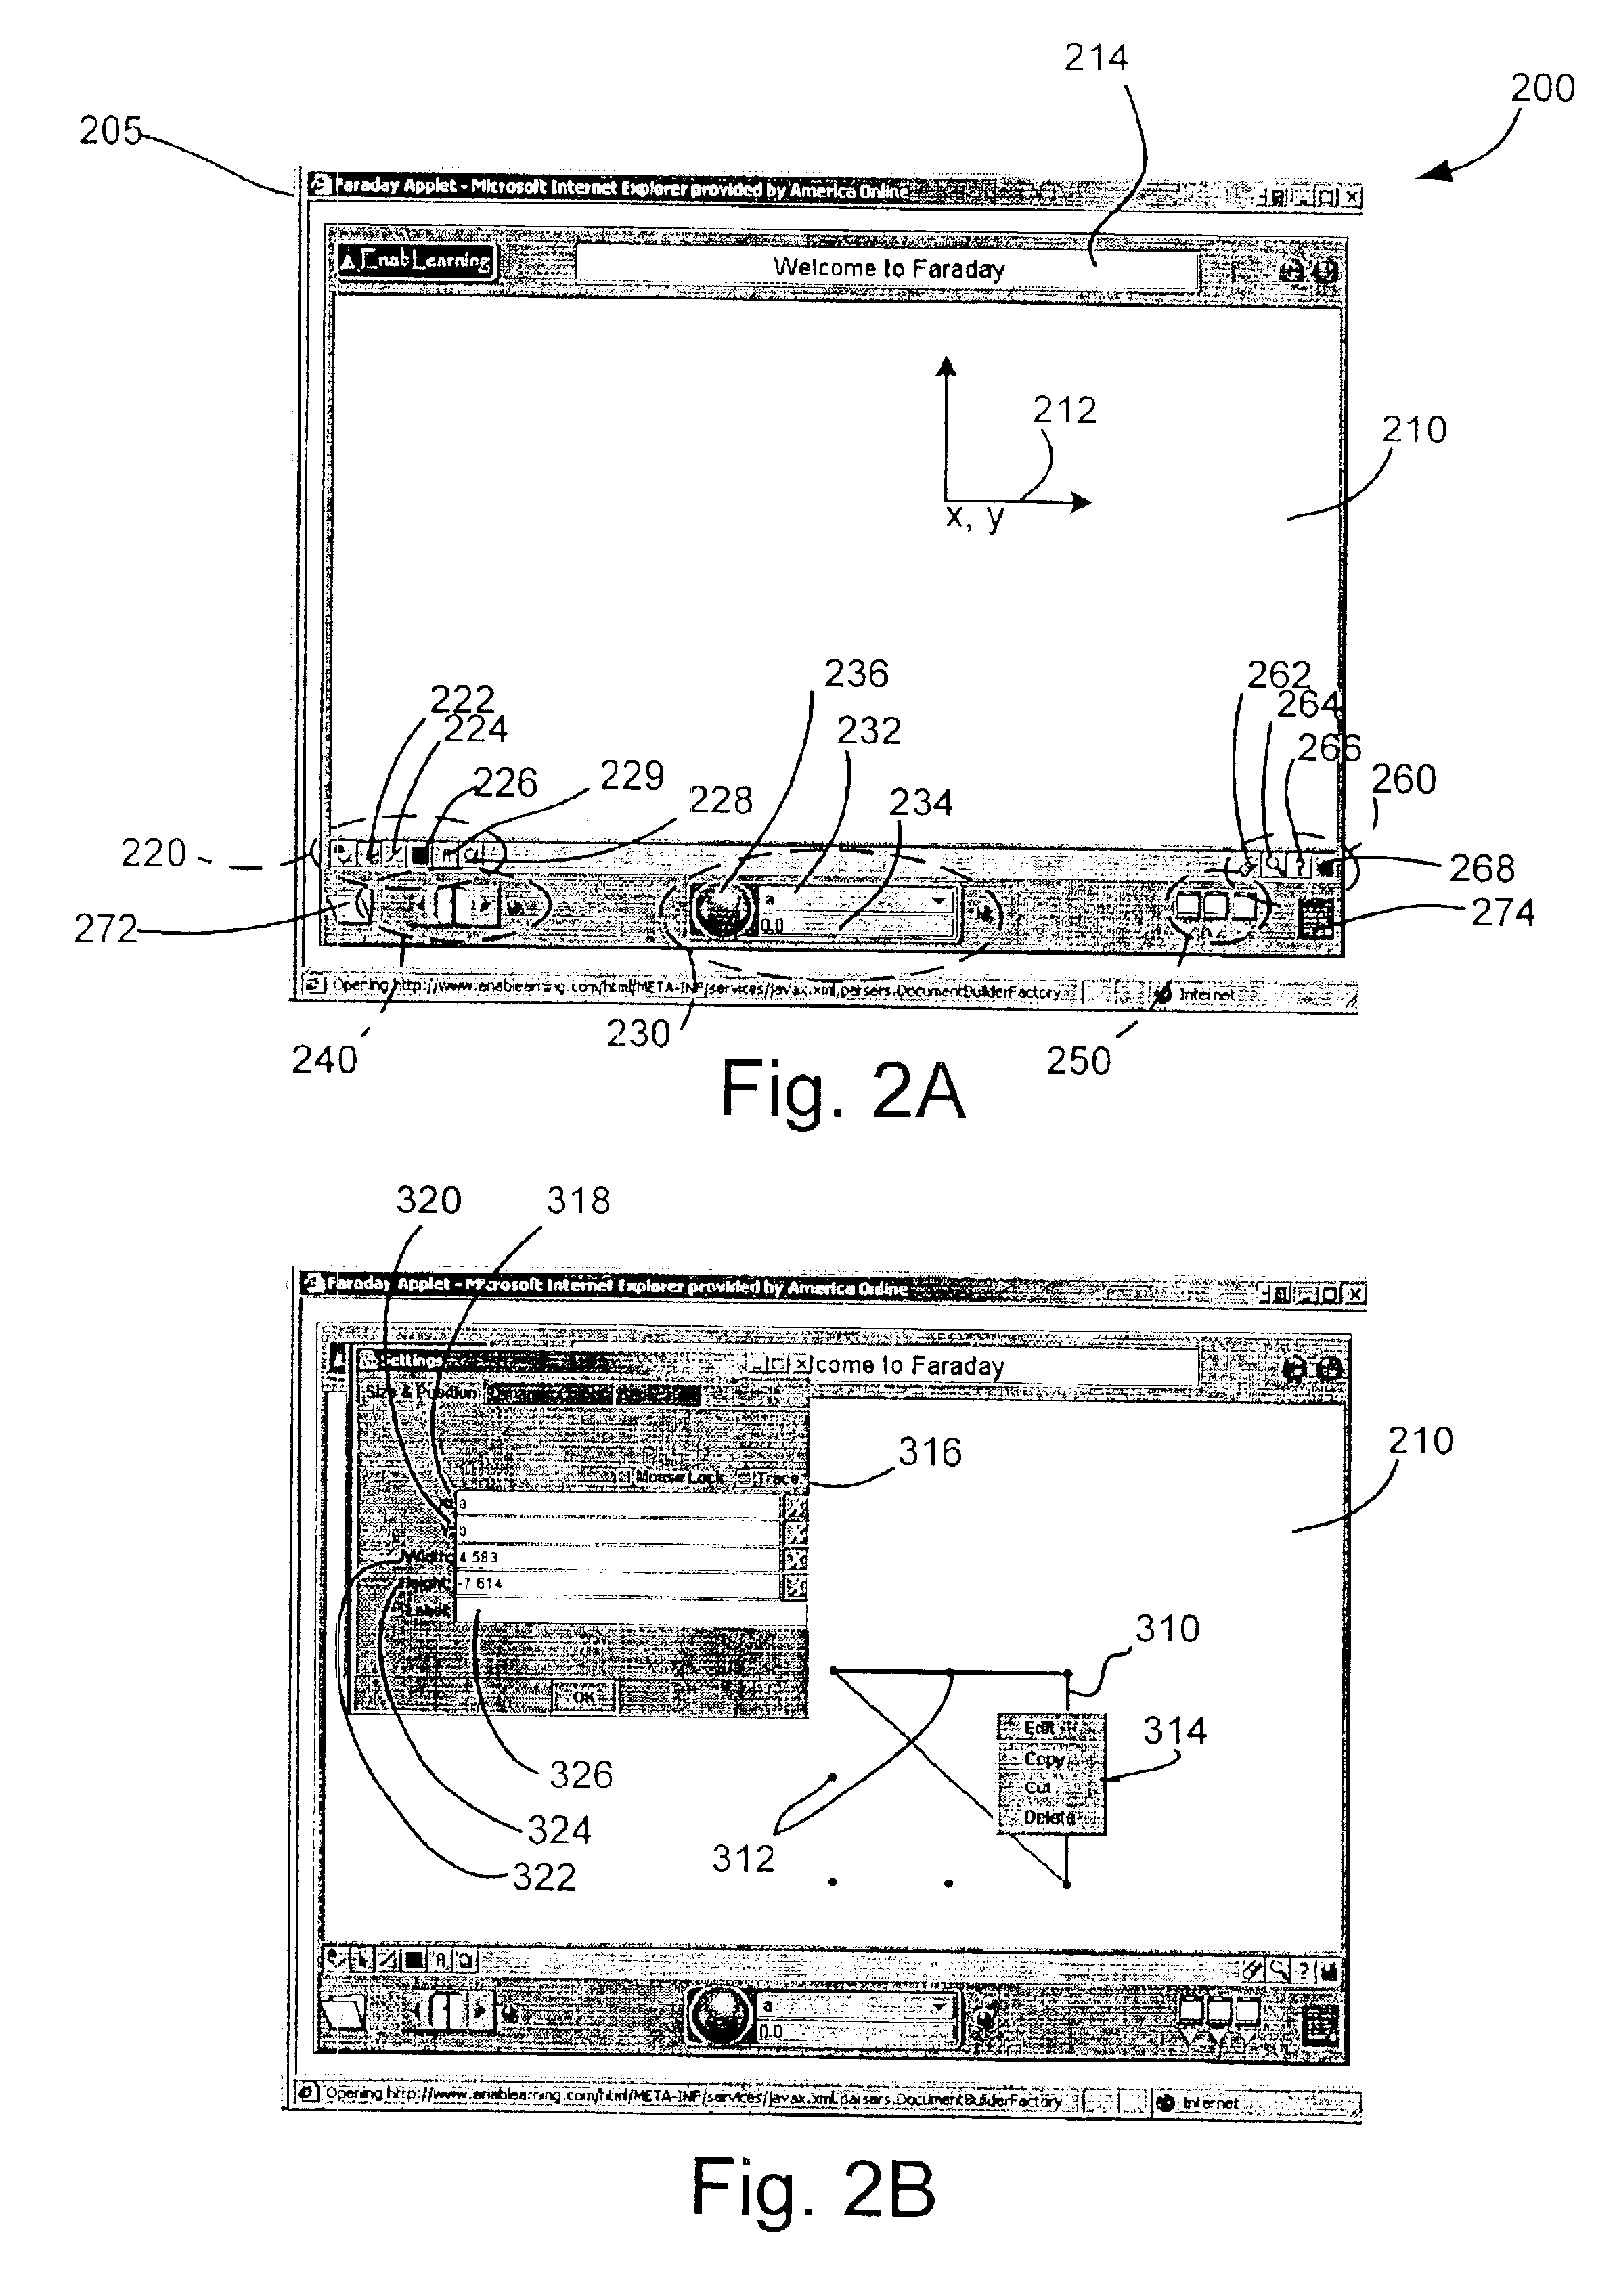 Computerized system and method for visually based education